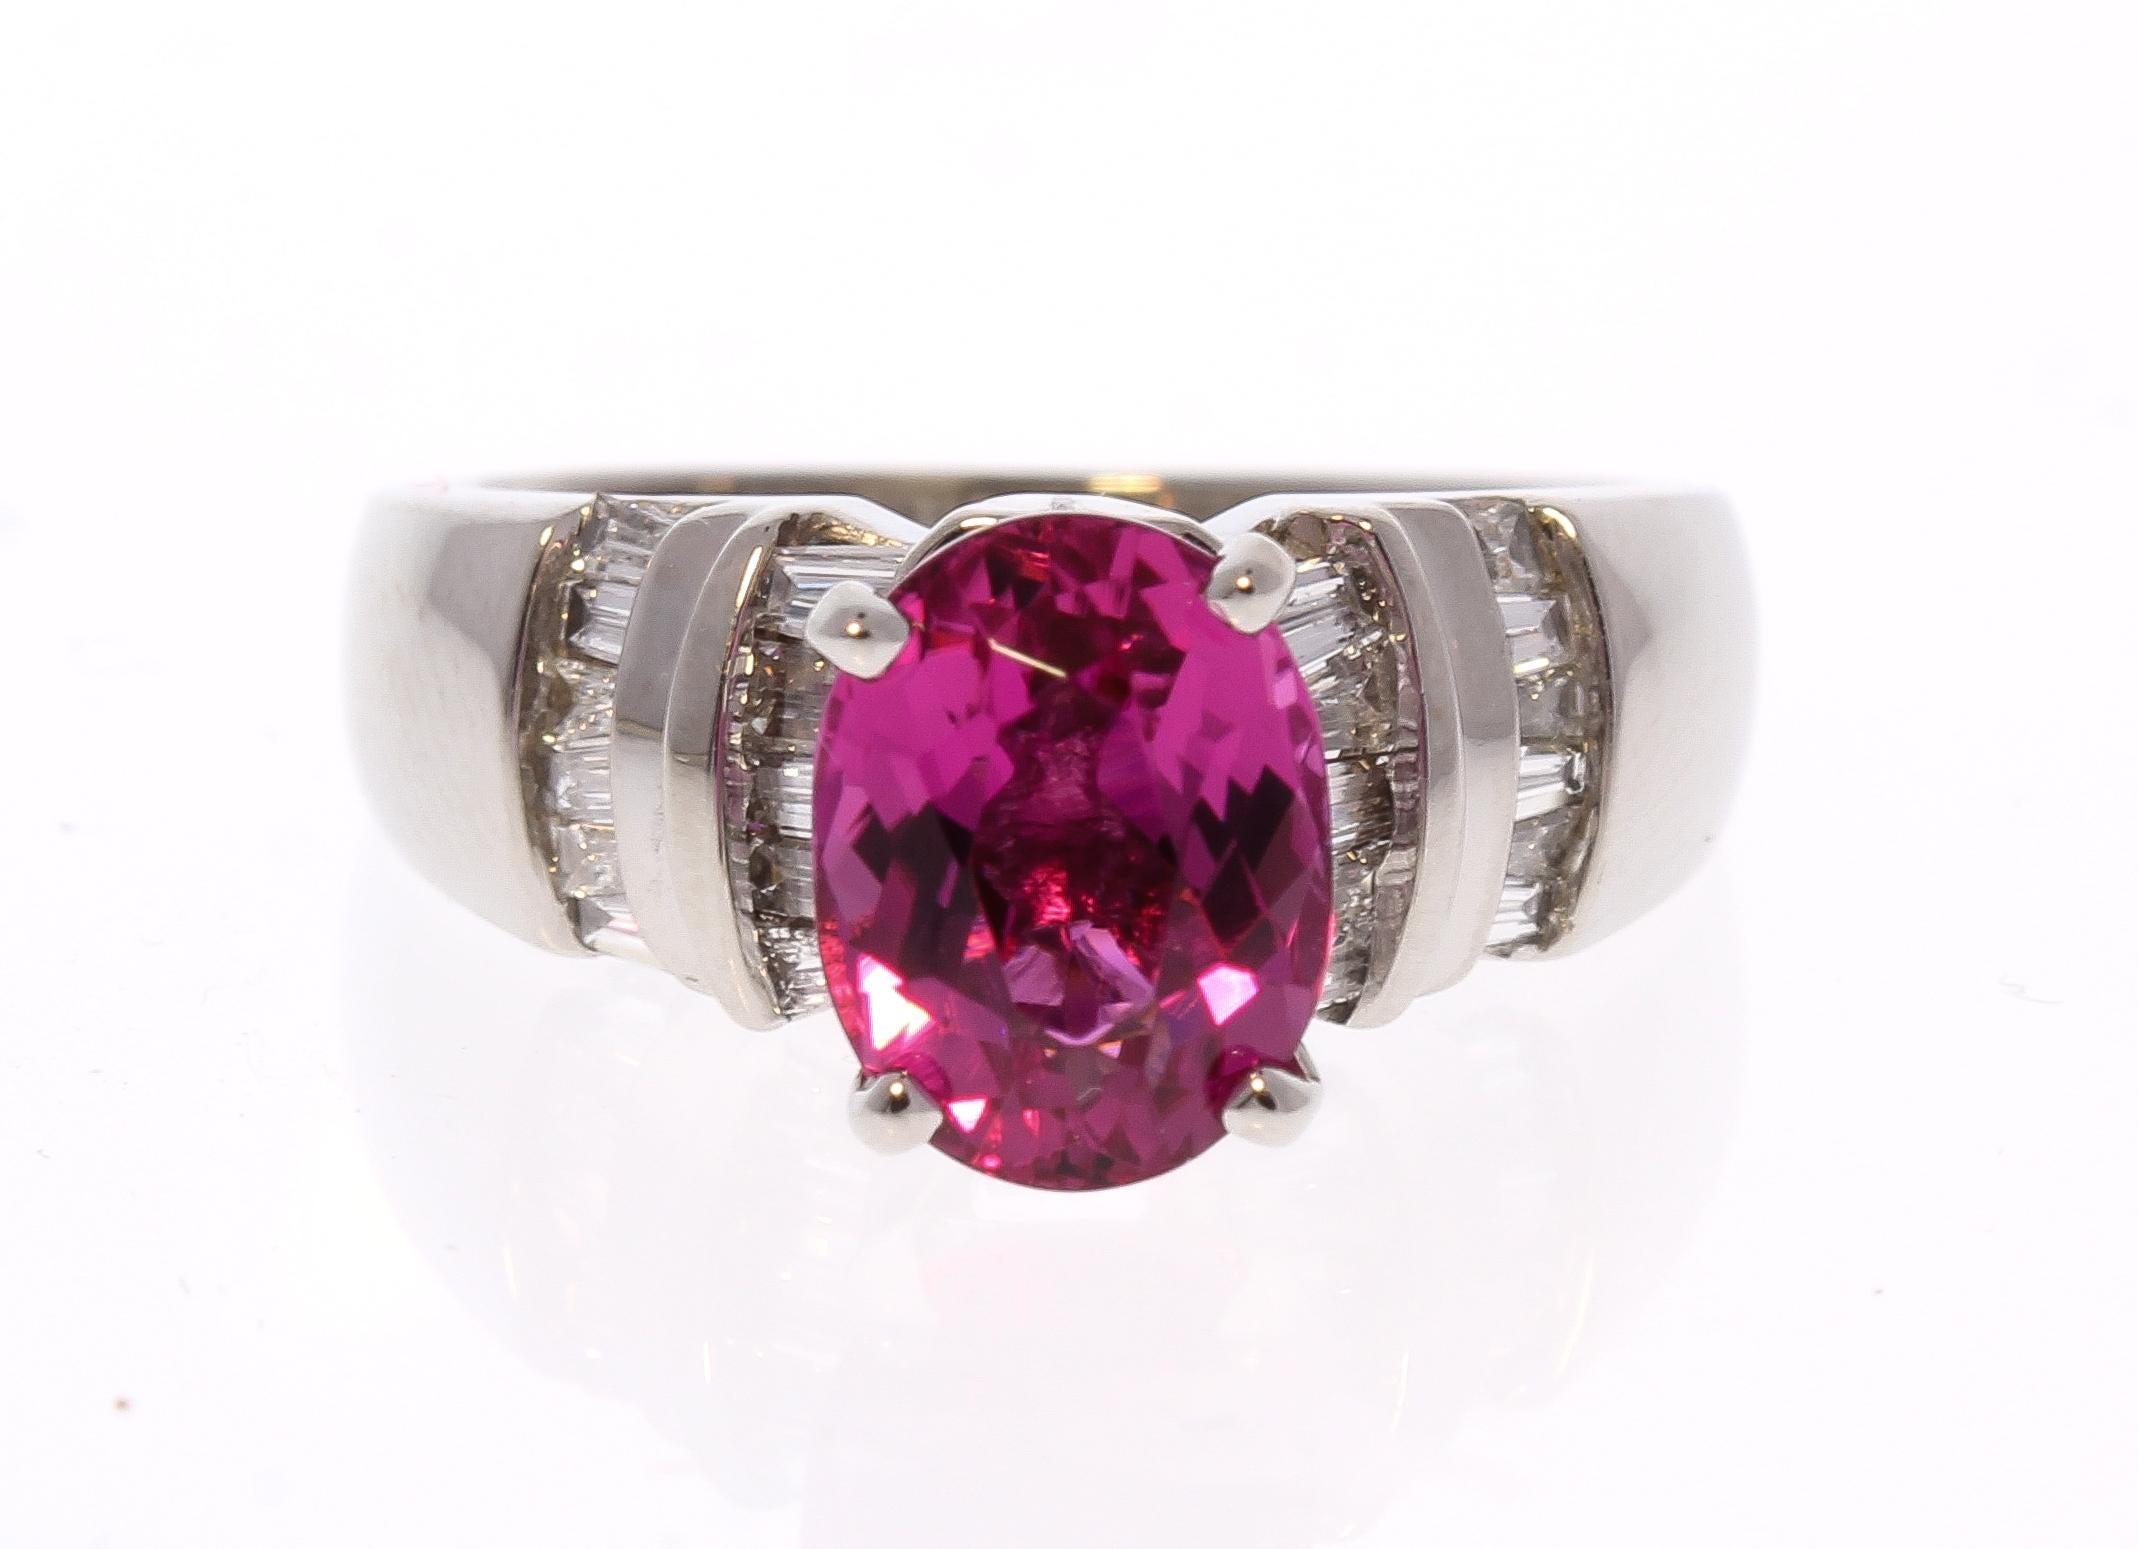 Incredible color and sparkle along with show-stopping style make this glamorous diamond and rubellite ring stand out. Designed in brightly polished 14 karat white gold, this ring features an oval cut intense raspberry pinkish-red fine quality 2.17